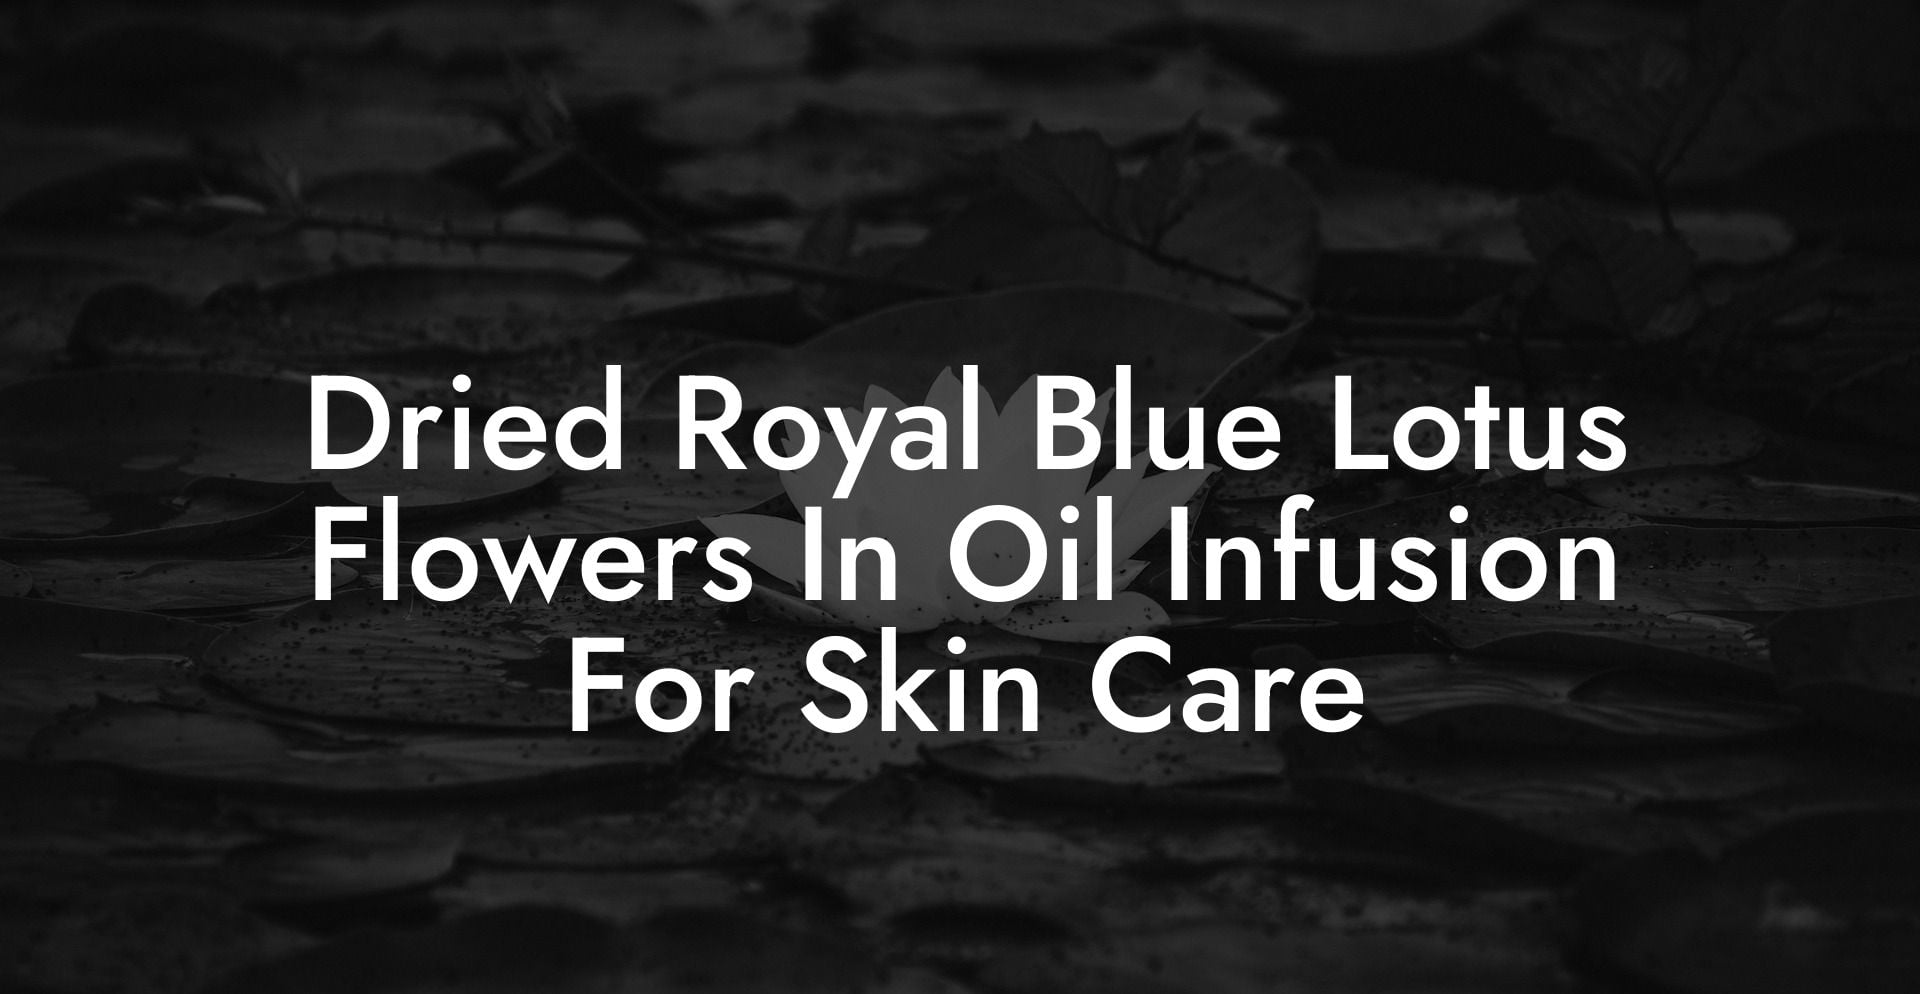 Dried Royal Blue Lotus Flowers In Oil Infusion For Skin Care